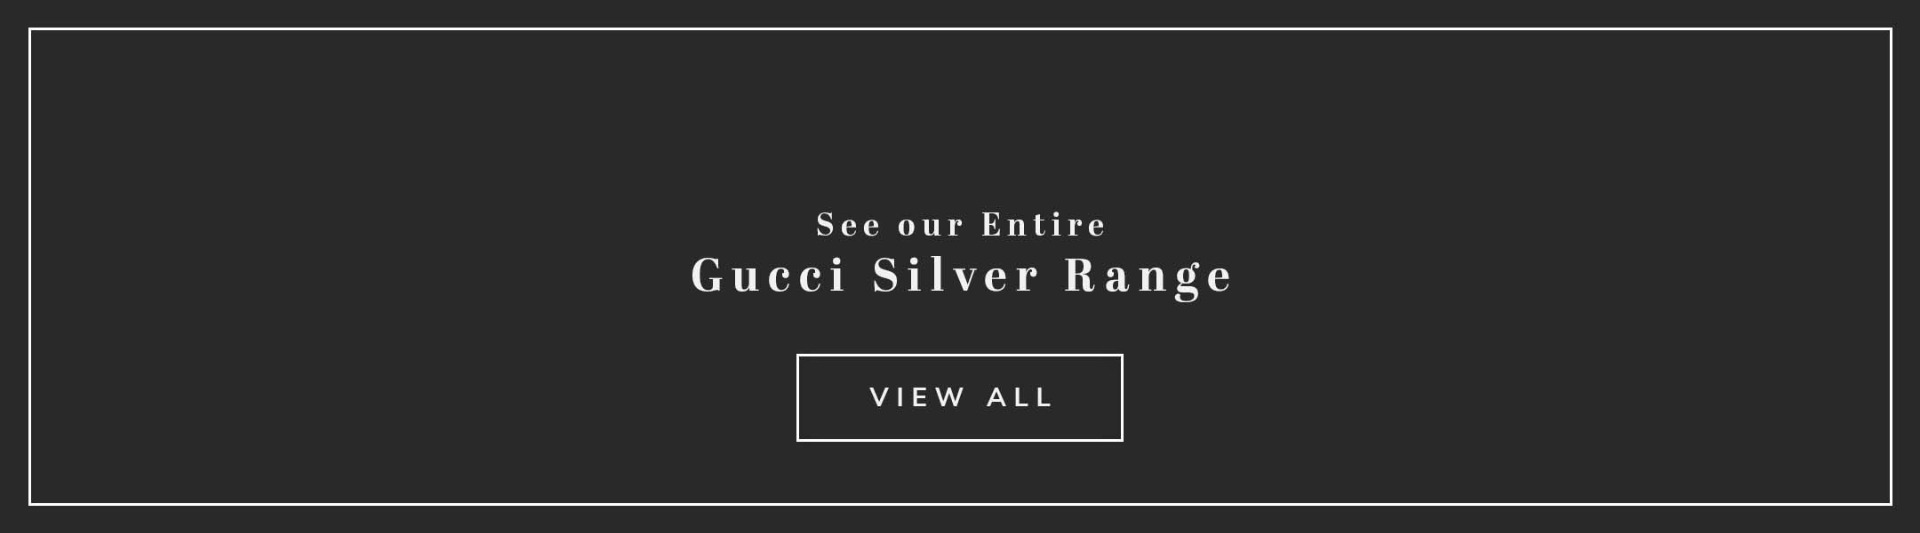 A Gucci jewellery black banner with text see our entire gucci silver range view all